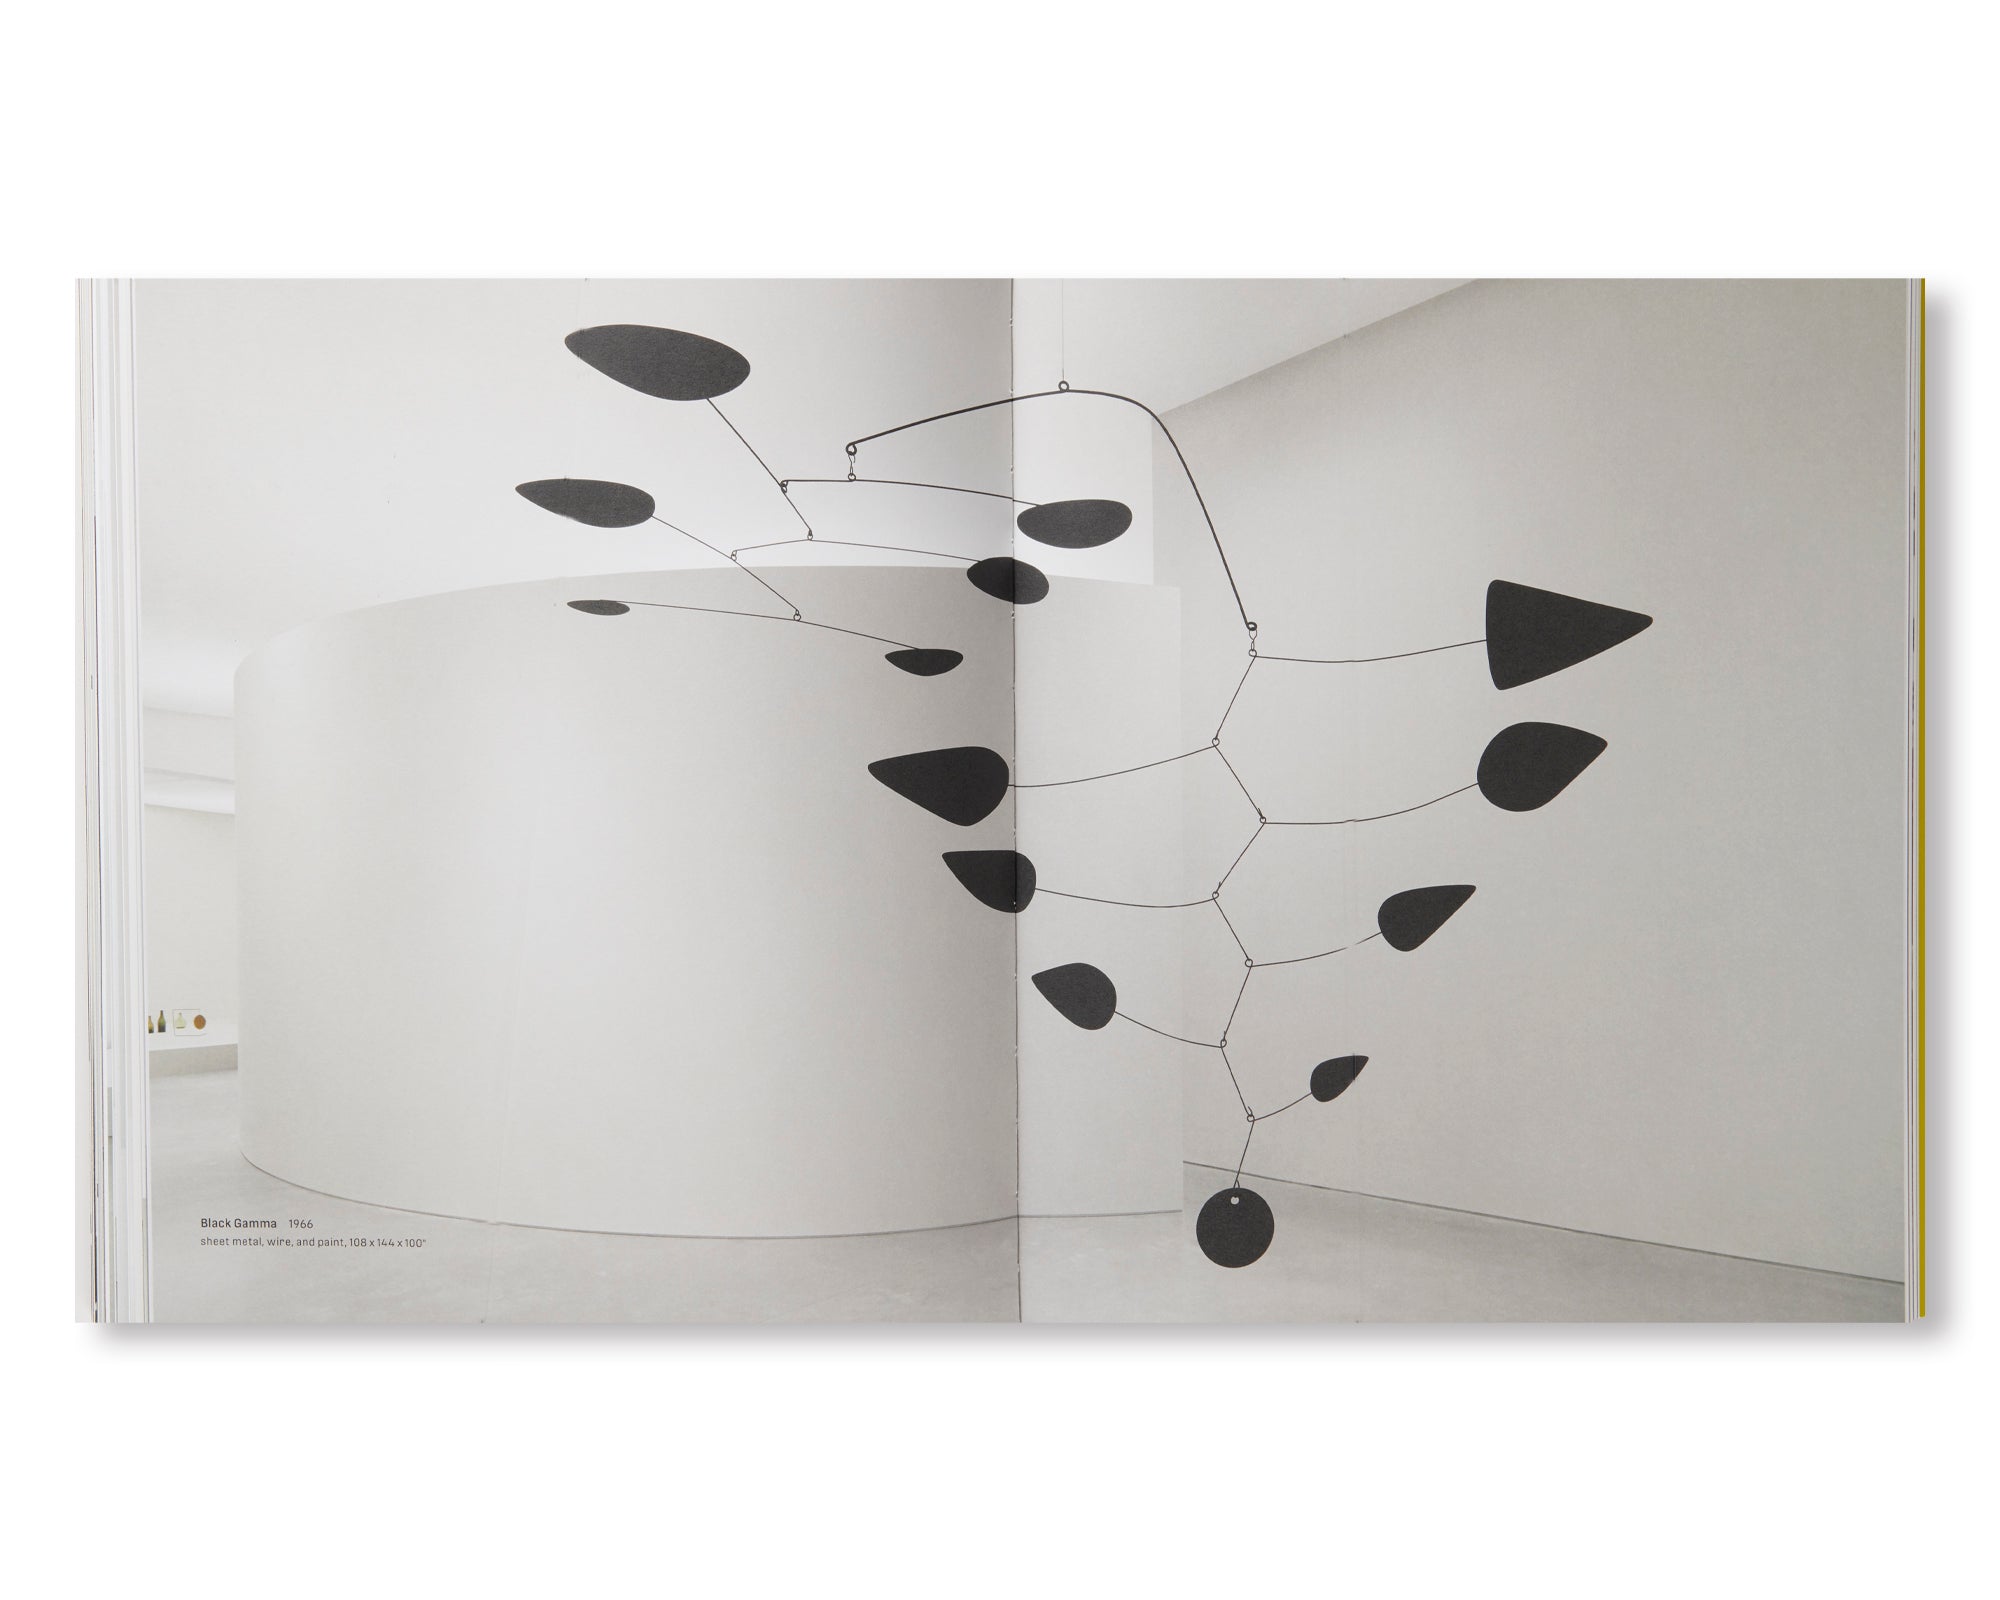 CALDER: SMALL SPHERE AND HEAVY SPHERE by Alexander Calder